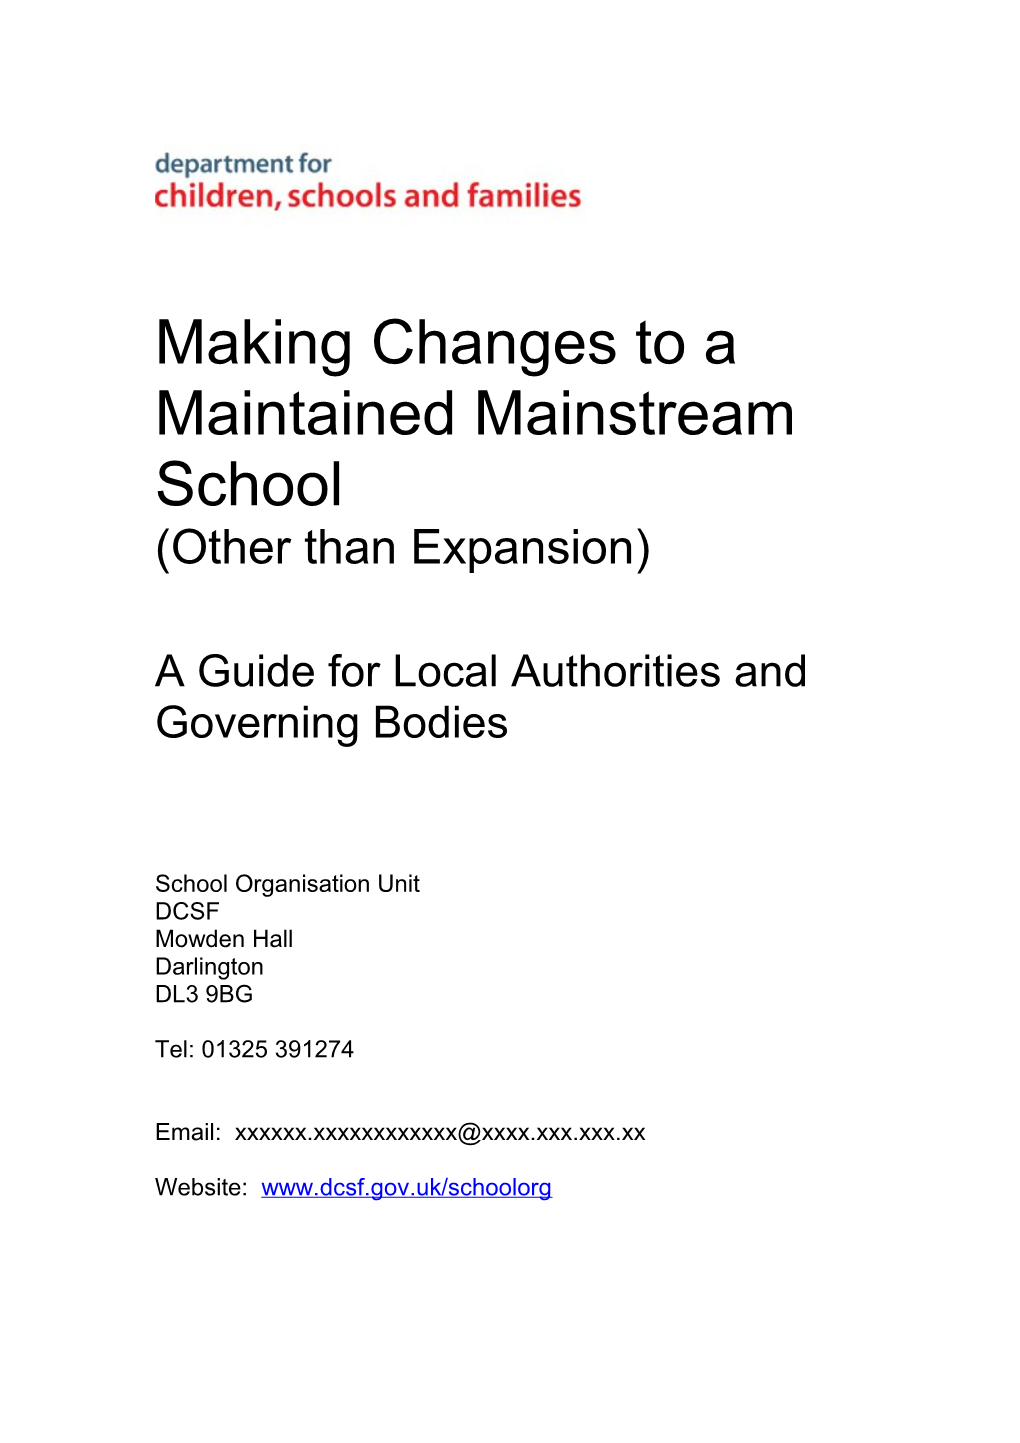 Making Changes to a Maintained Mainstreamschool